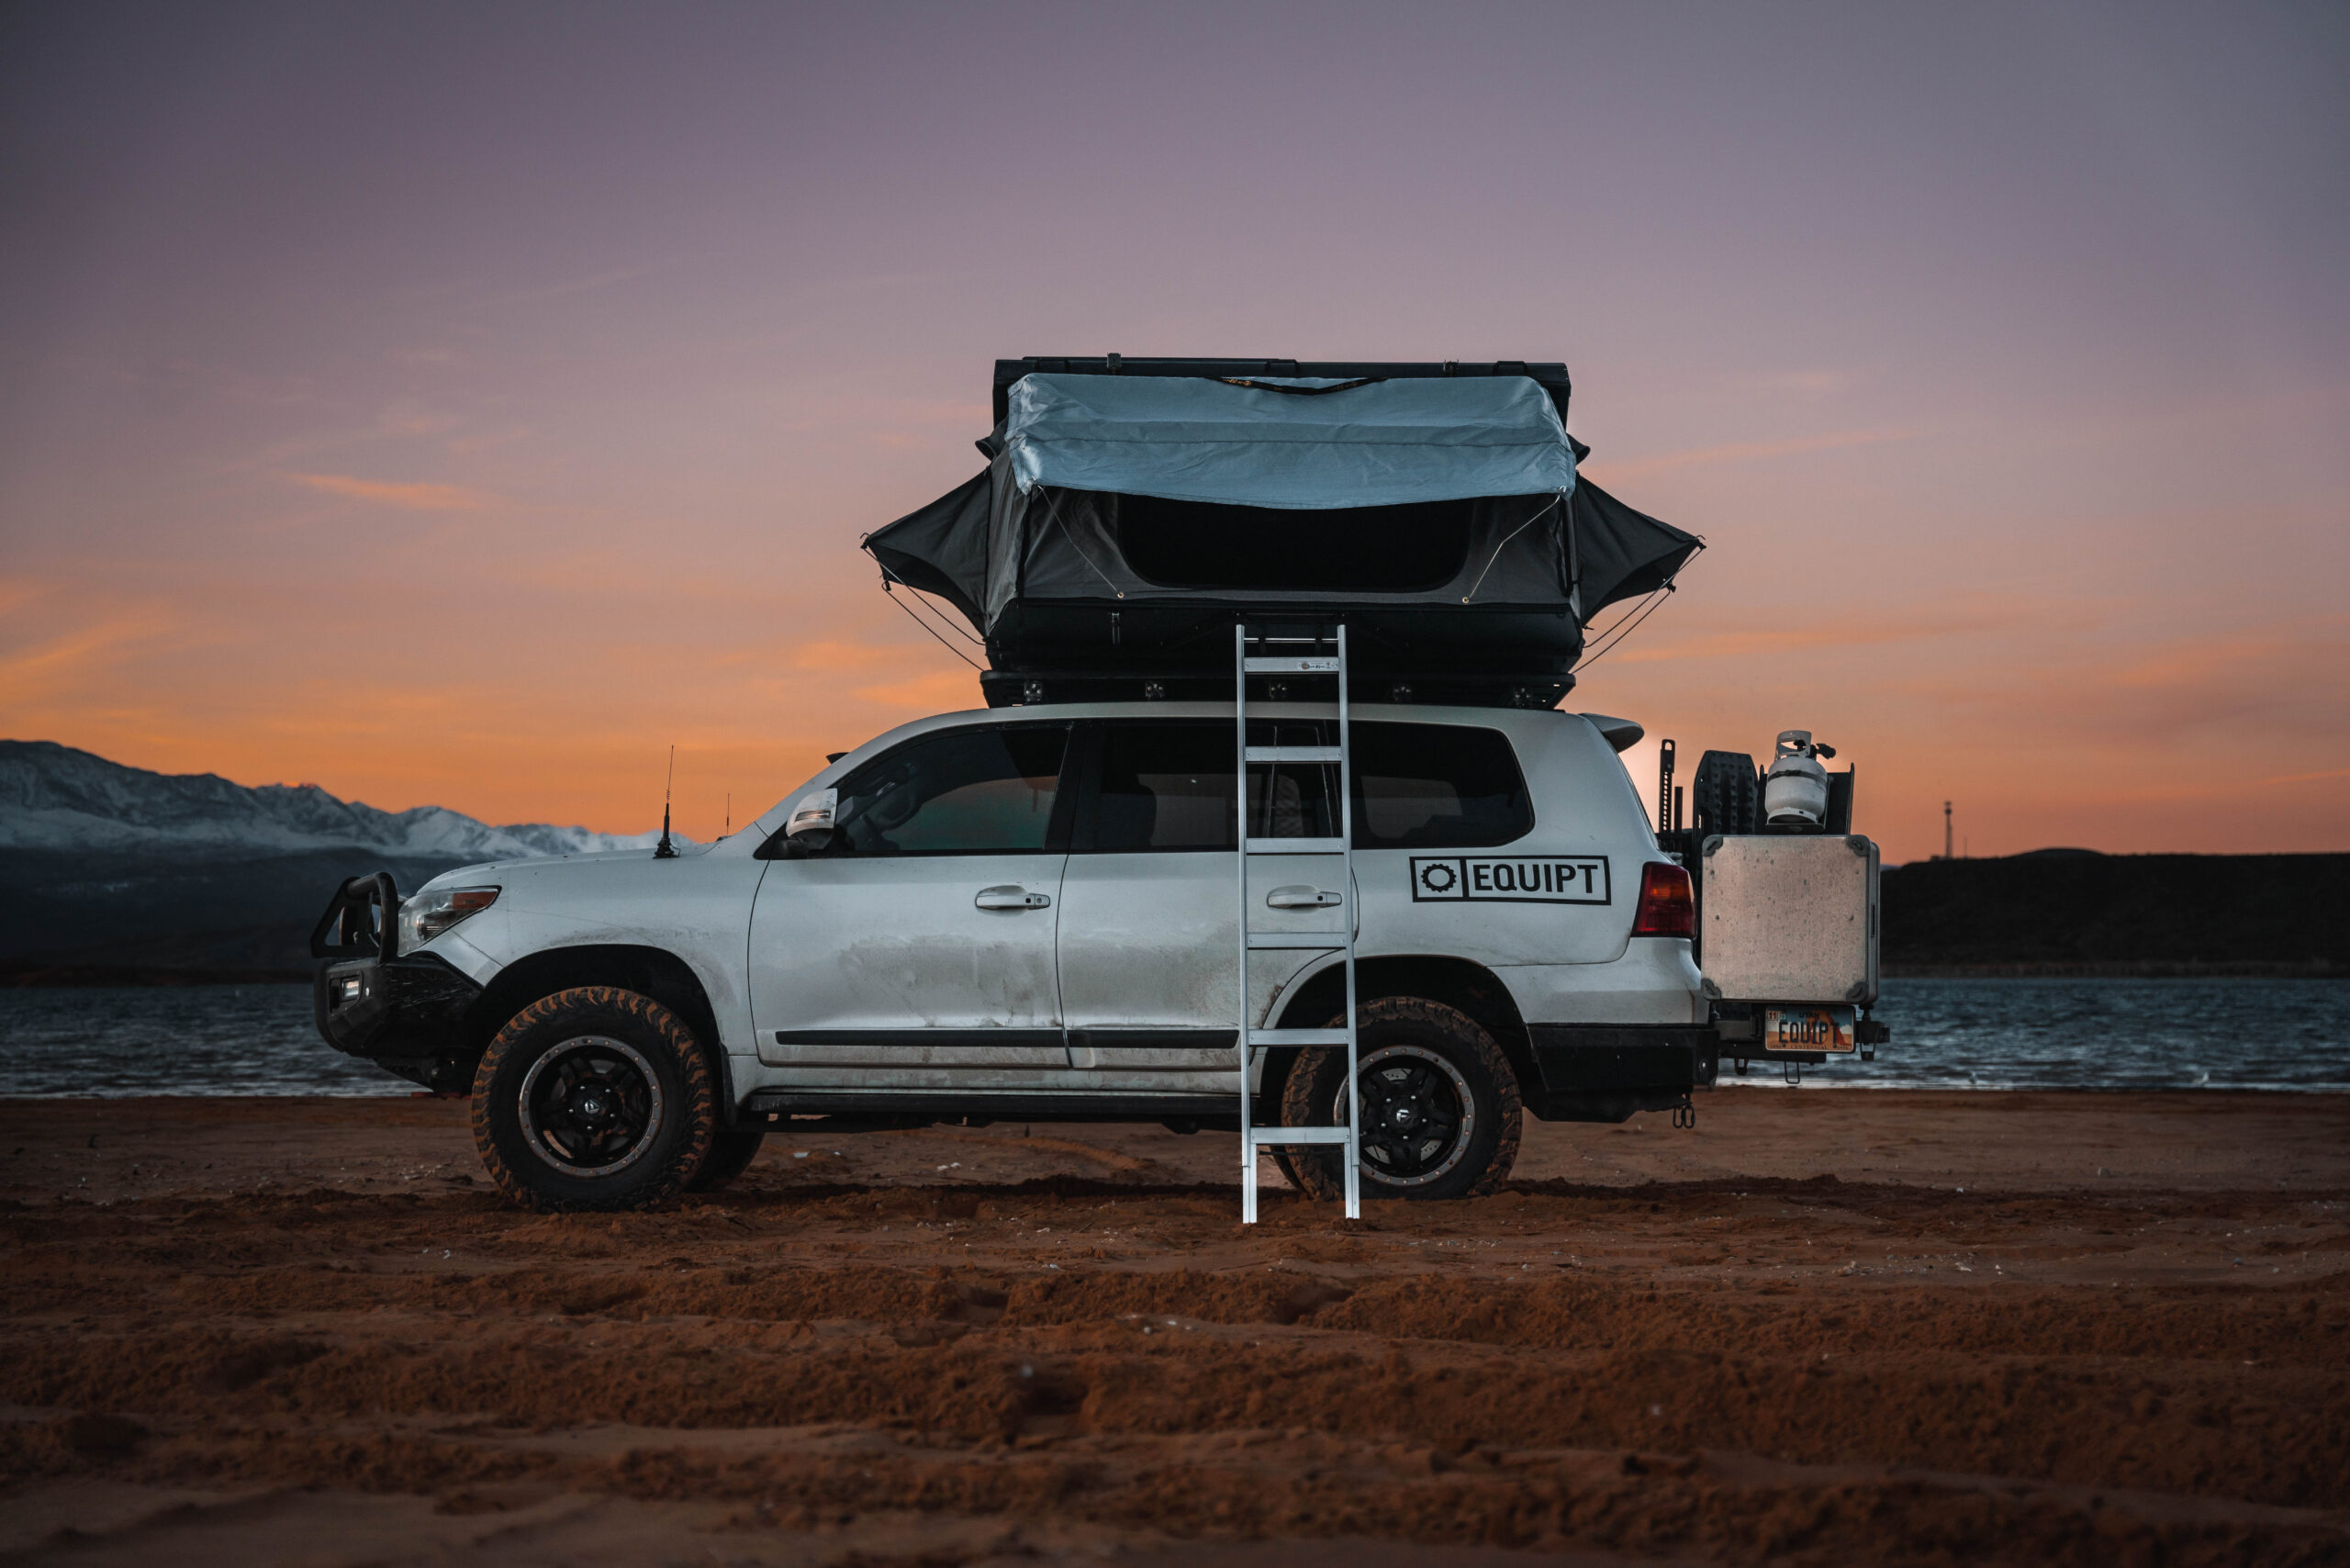 An SUV parks on dirt in front of a pink sunset with the Eezi-Awn roof top tent deployed.